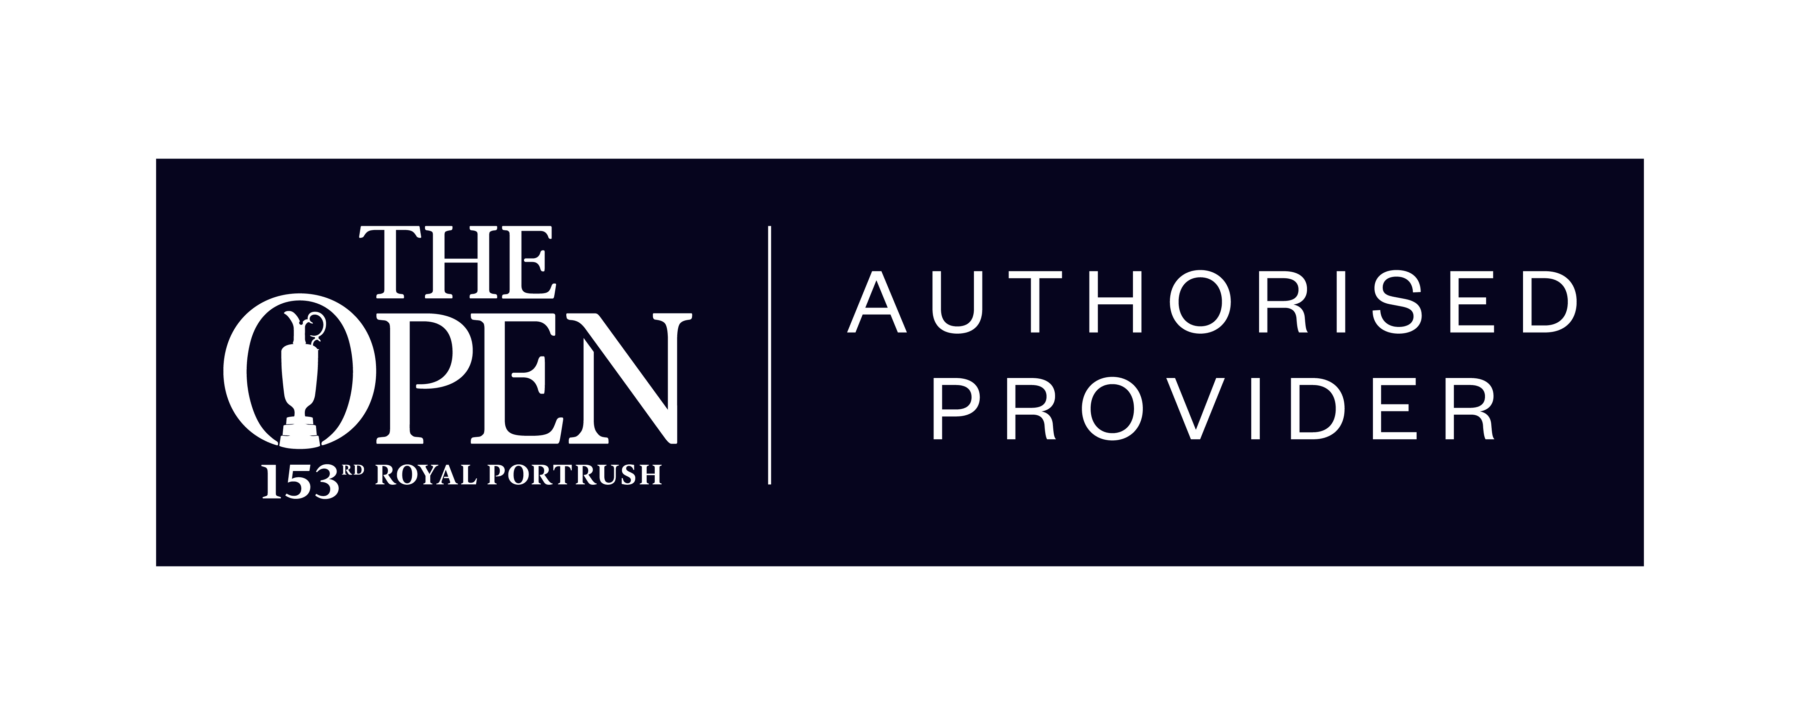 Authorised Provider logo for the open golf championship